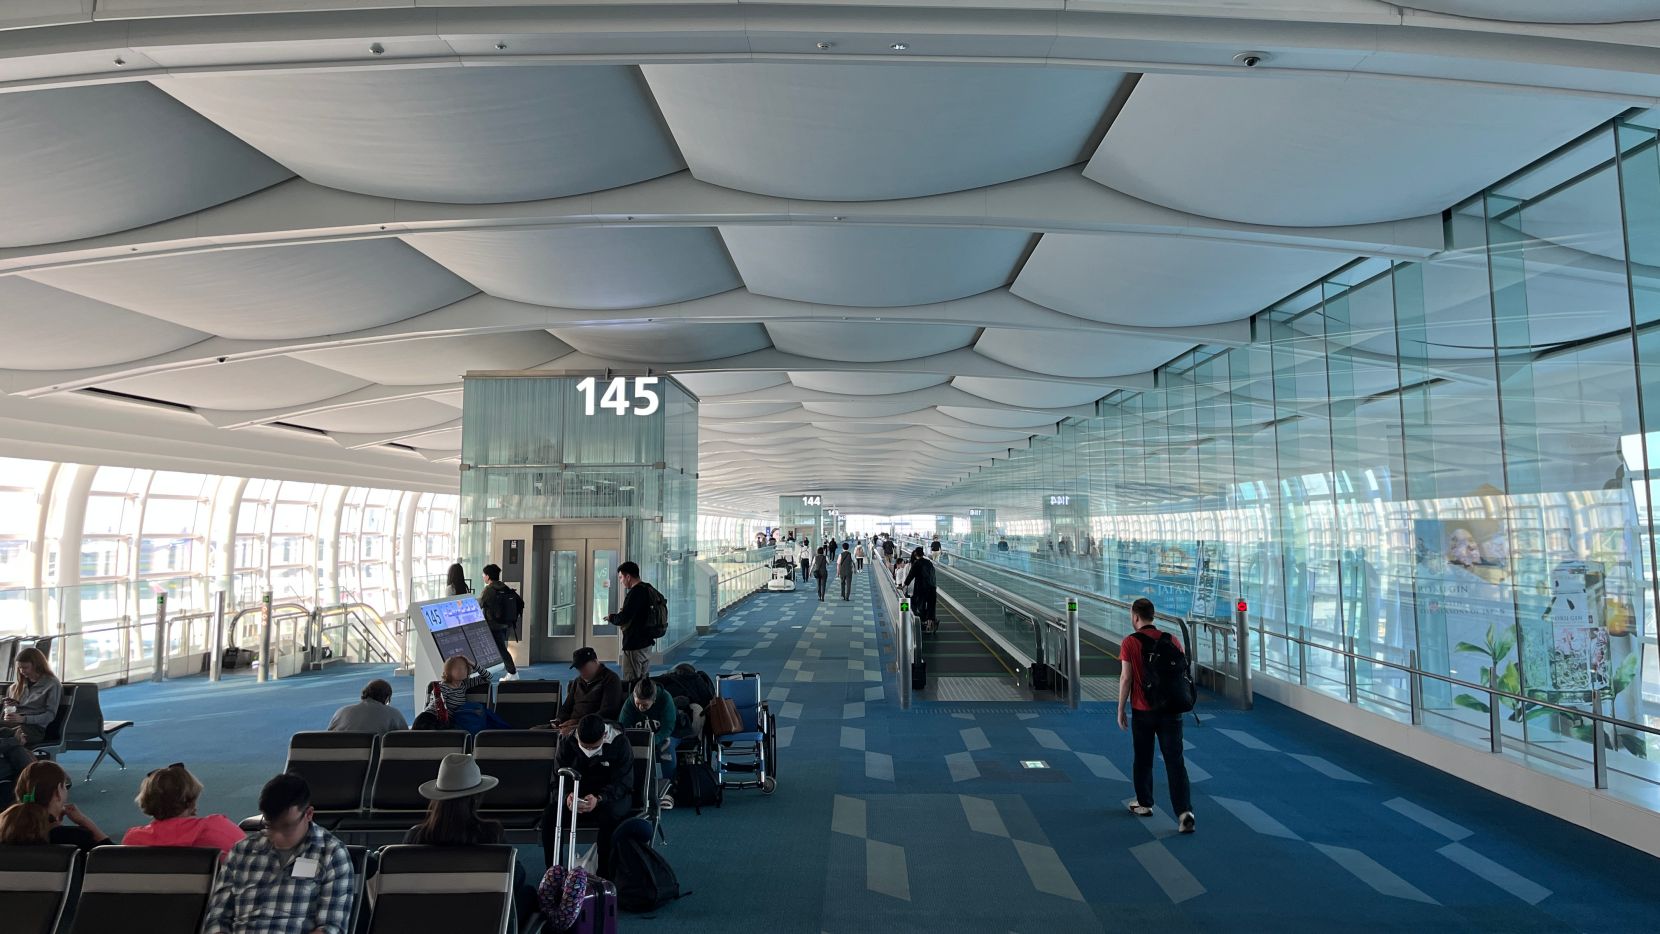 Airport gates in a long terminal. A glass wall runs down the length of the terminal on the right side.